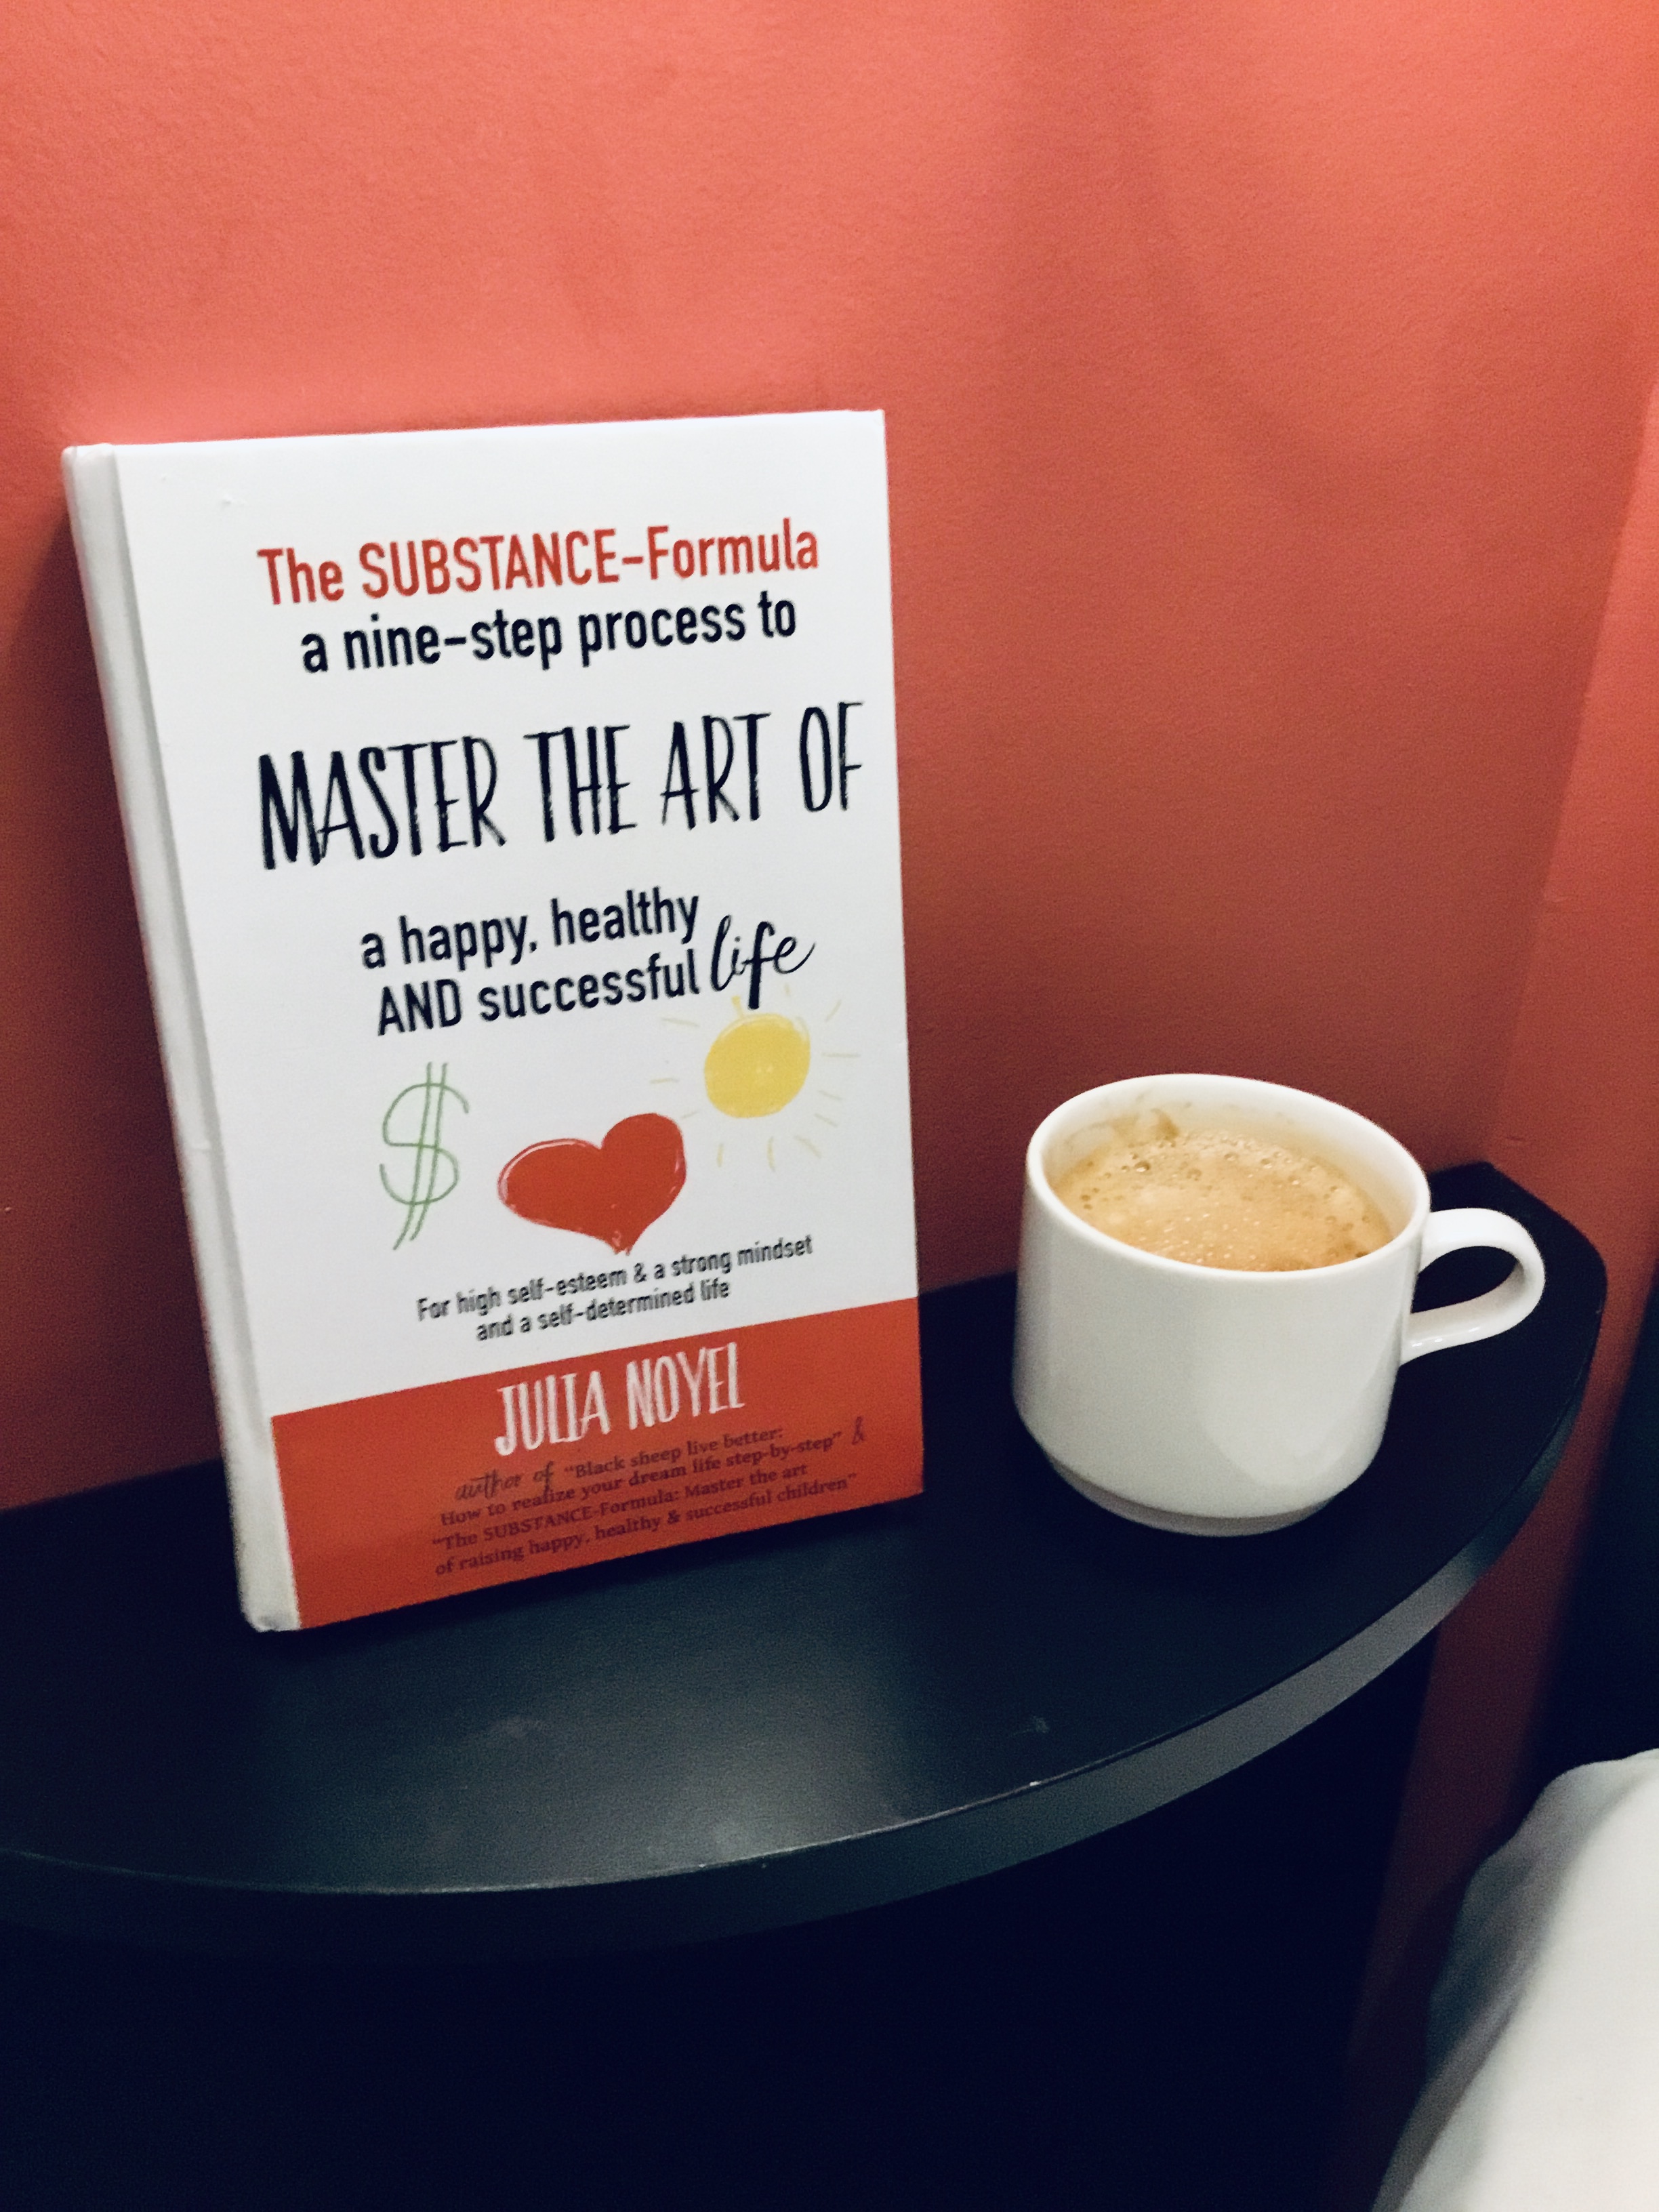 Book_The Substance-Formula Master the Art of a happy, healthy AND successful Life